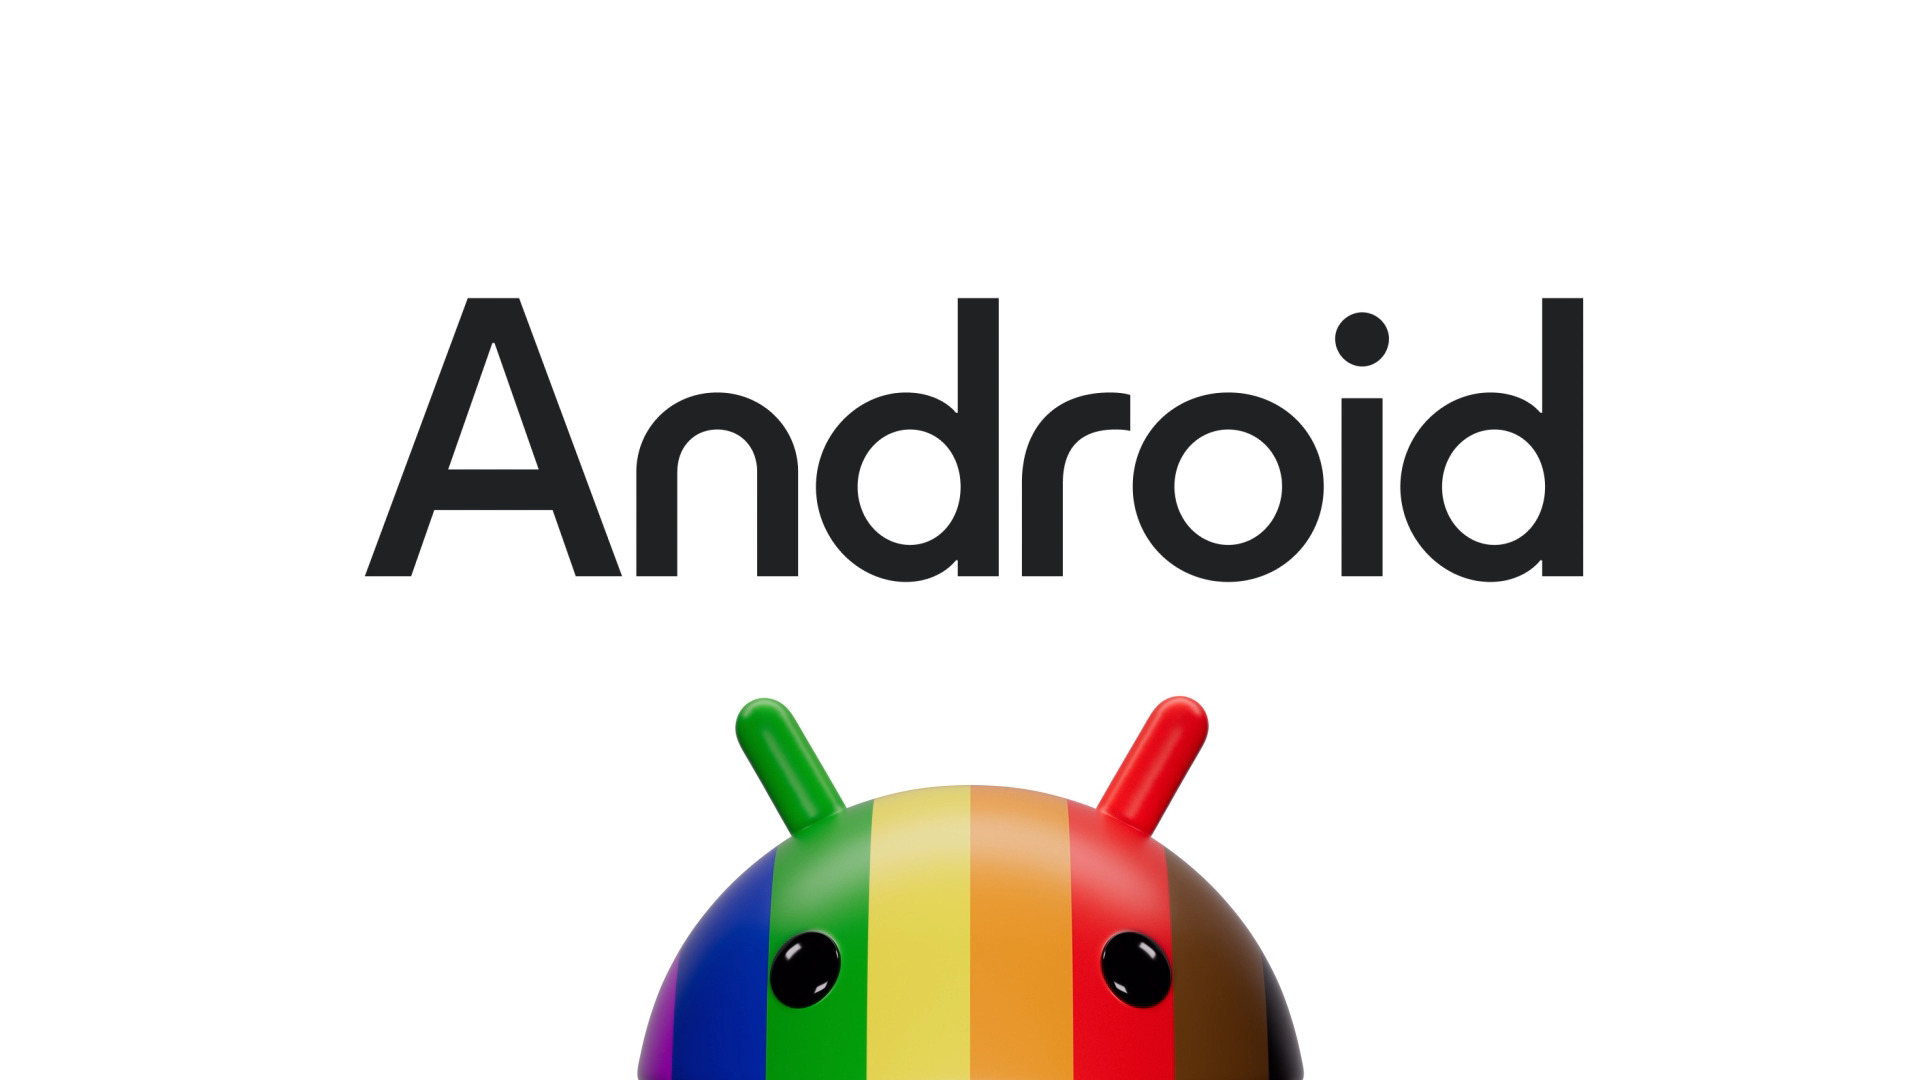 Android brand logo (courtsey of Android Developers)